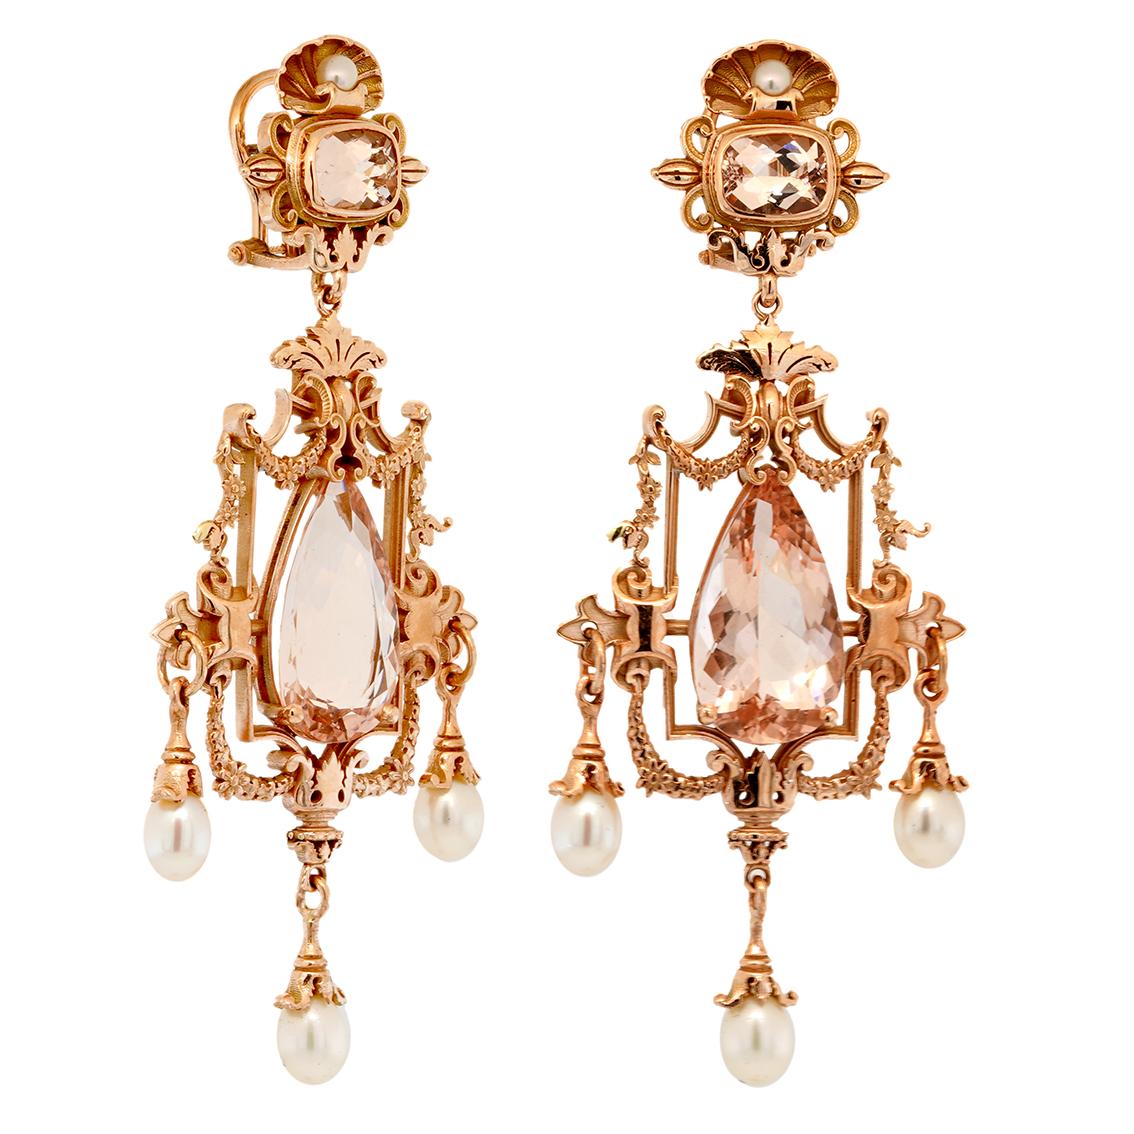 GARDENS OF ARMIDA EARRINGS

Inspired by the sheer opulence and intricacy of grand gilded baroque mirrors, these earrings take their name from Torquato Tasso’s tale of Rinaldo and Armida. Magnificently ornate, these earrings are as intoxicating as